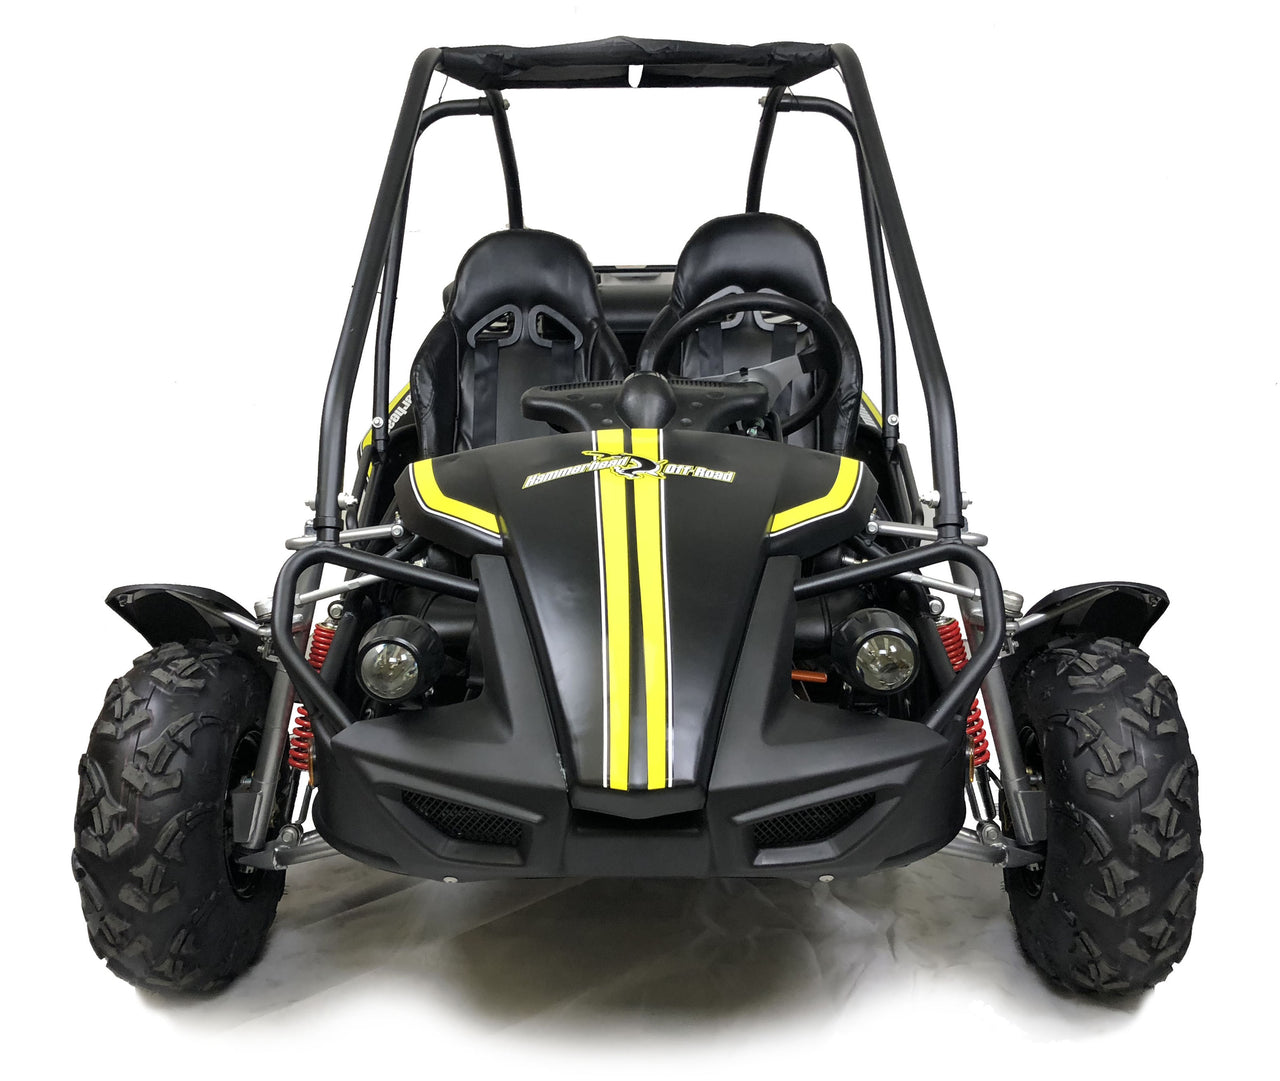 hammerhead-gts150-off-road-buggy-black-front-view